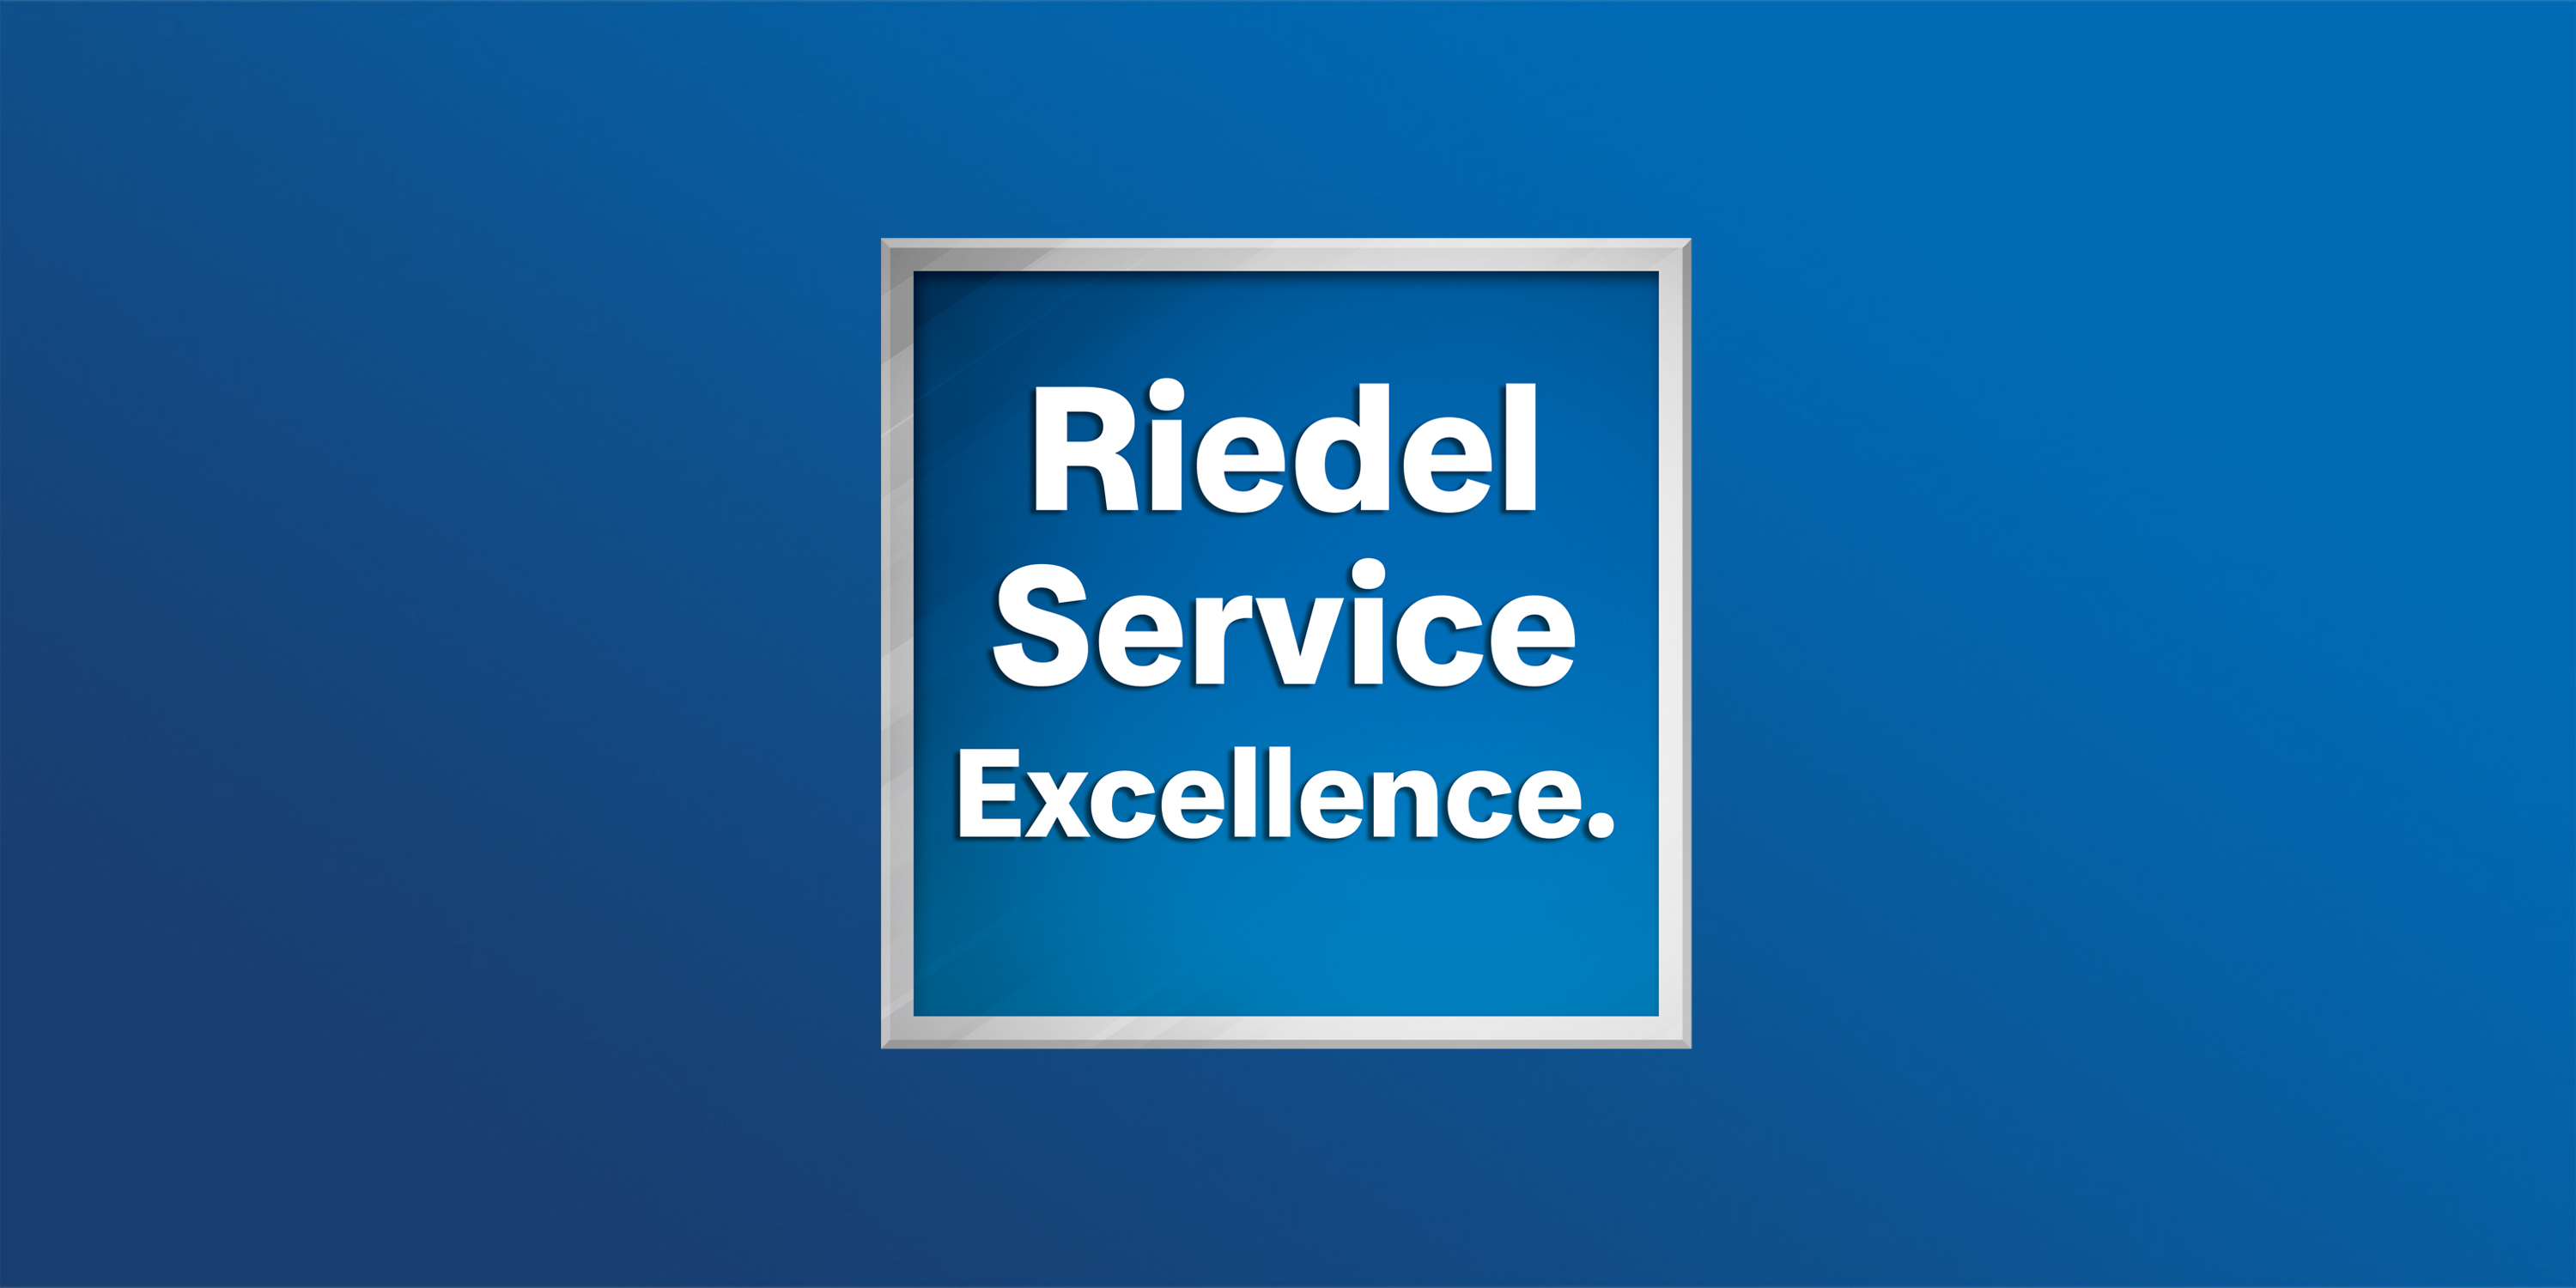 Riedel Kooling, Riedel technology, Service Excellence, best service, image